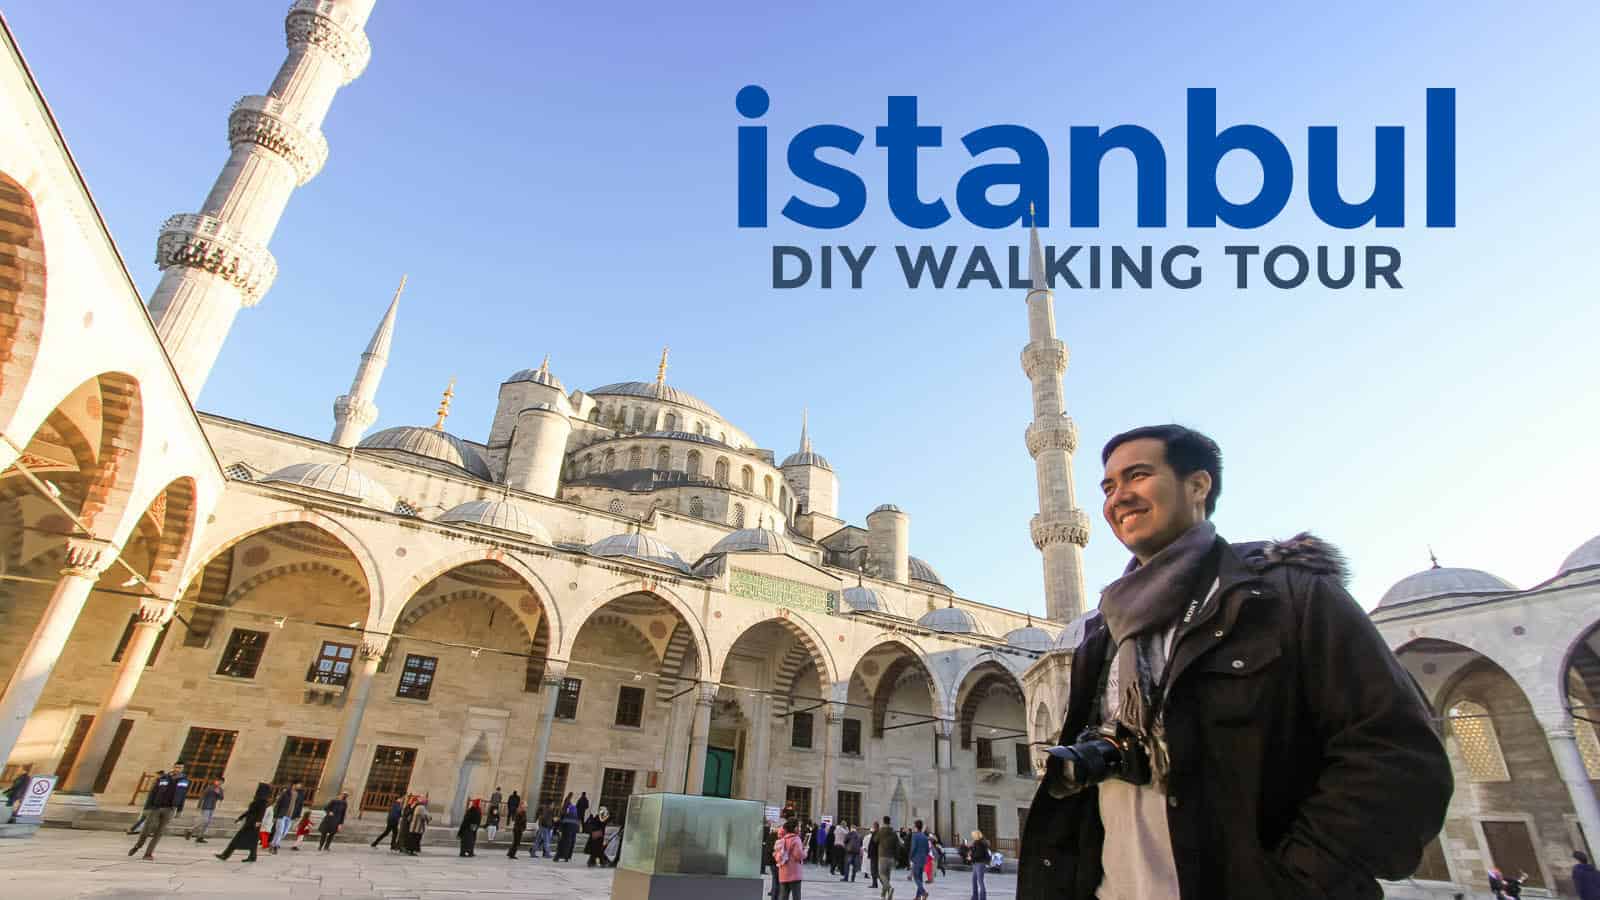 Top 9 Istanbul Tourist Attractions: A DIY Walking Tour